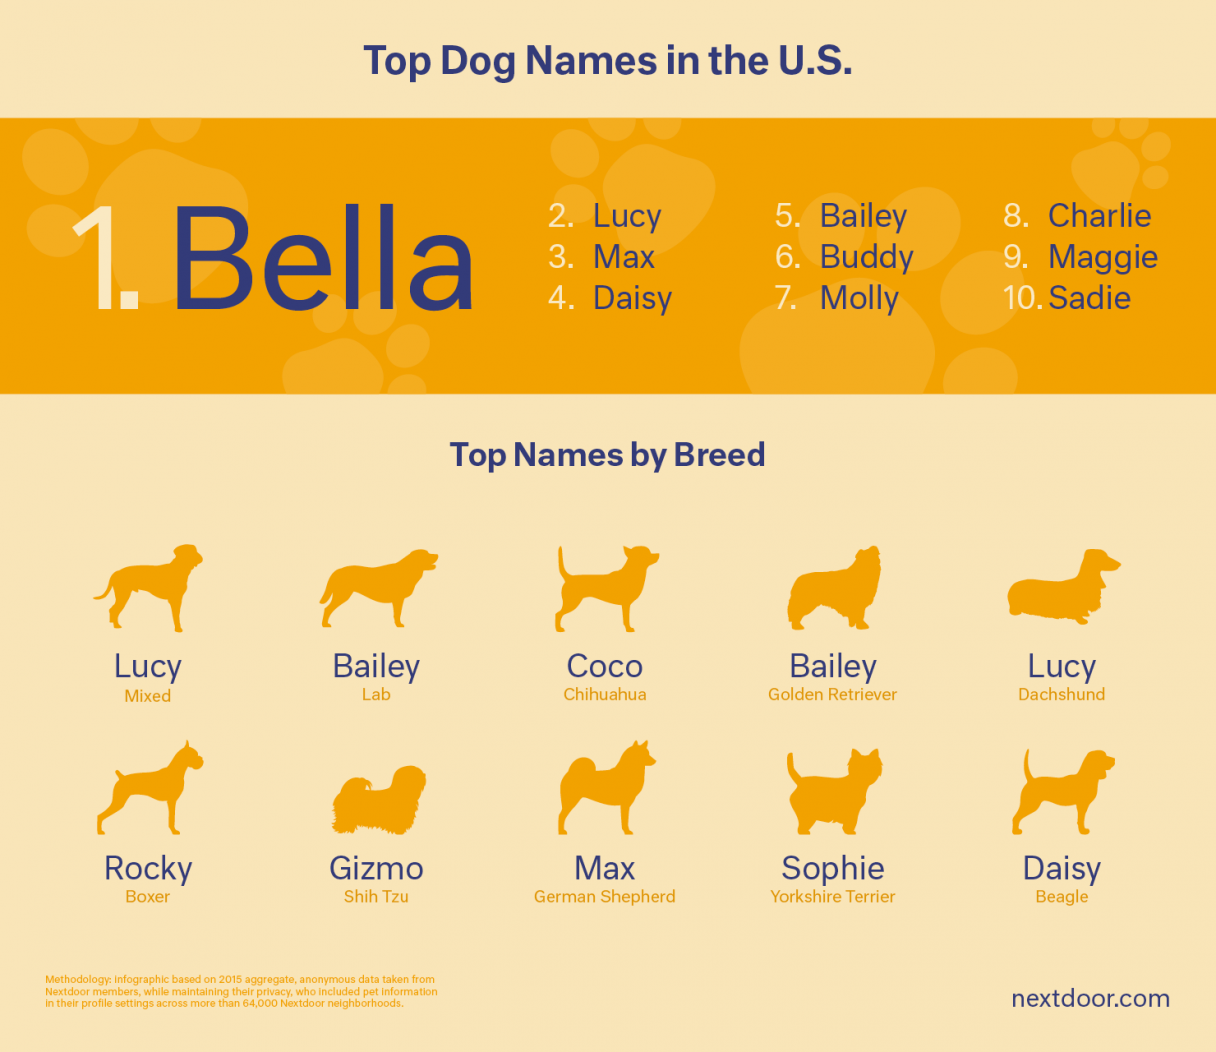 Is Your Dog’s Name the Most Popular for His Breed? – American Kennel Club